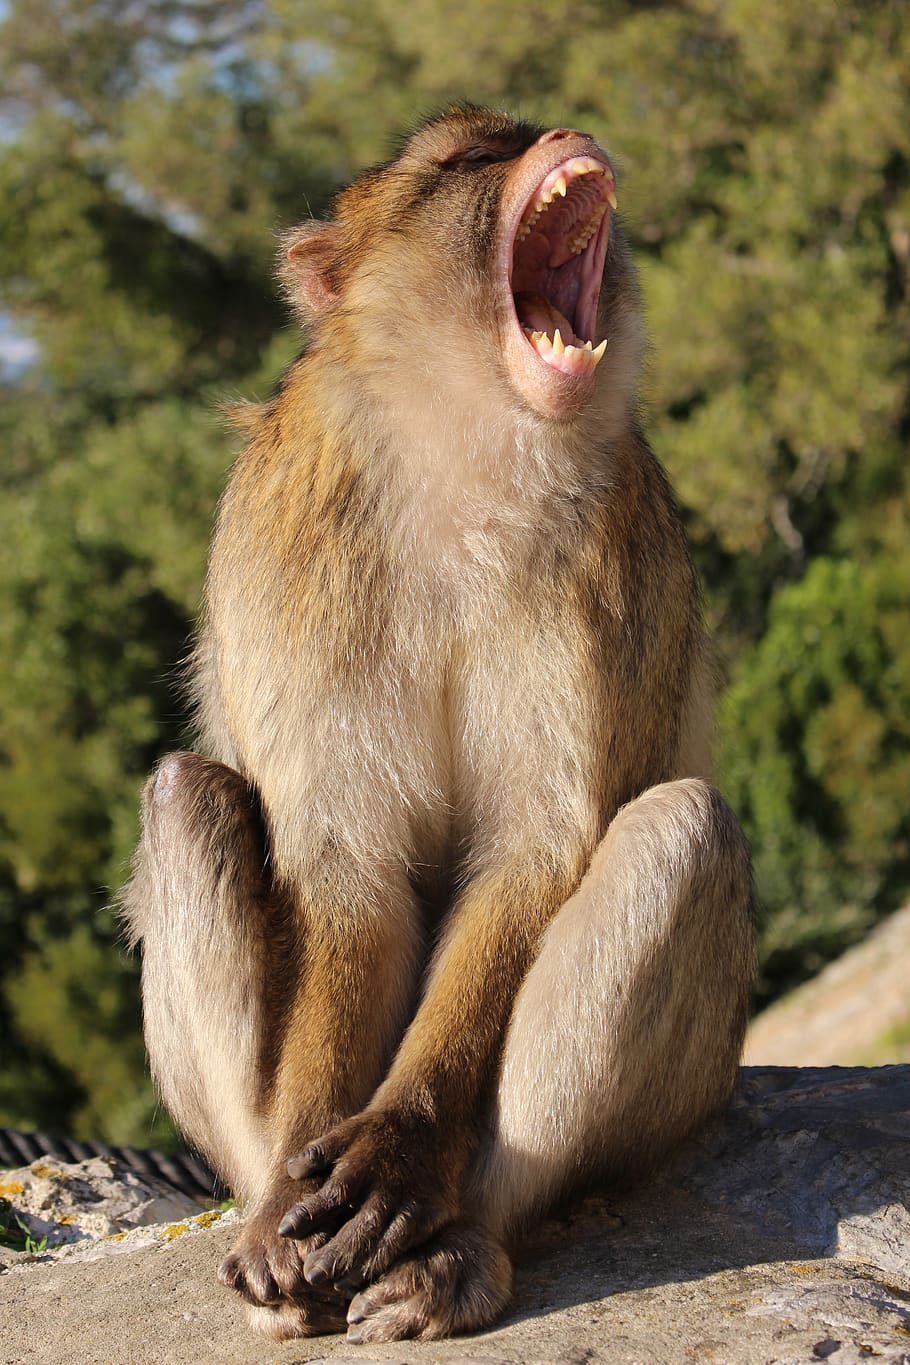 monkey, macaque, mammal, animal, primate, close up, hairy, jaw, teeth, shout